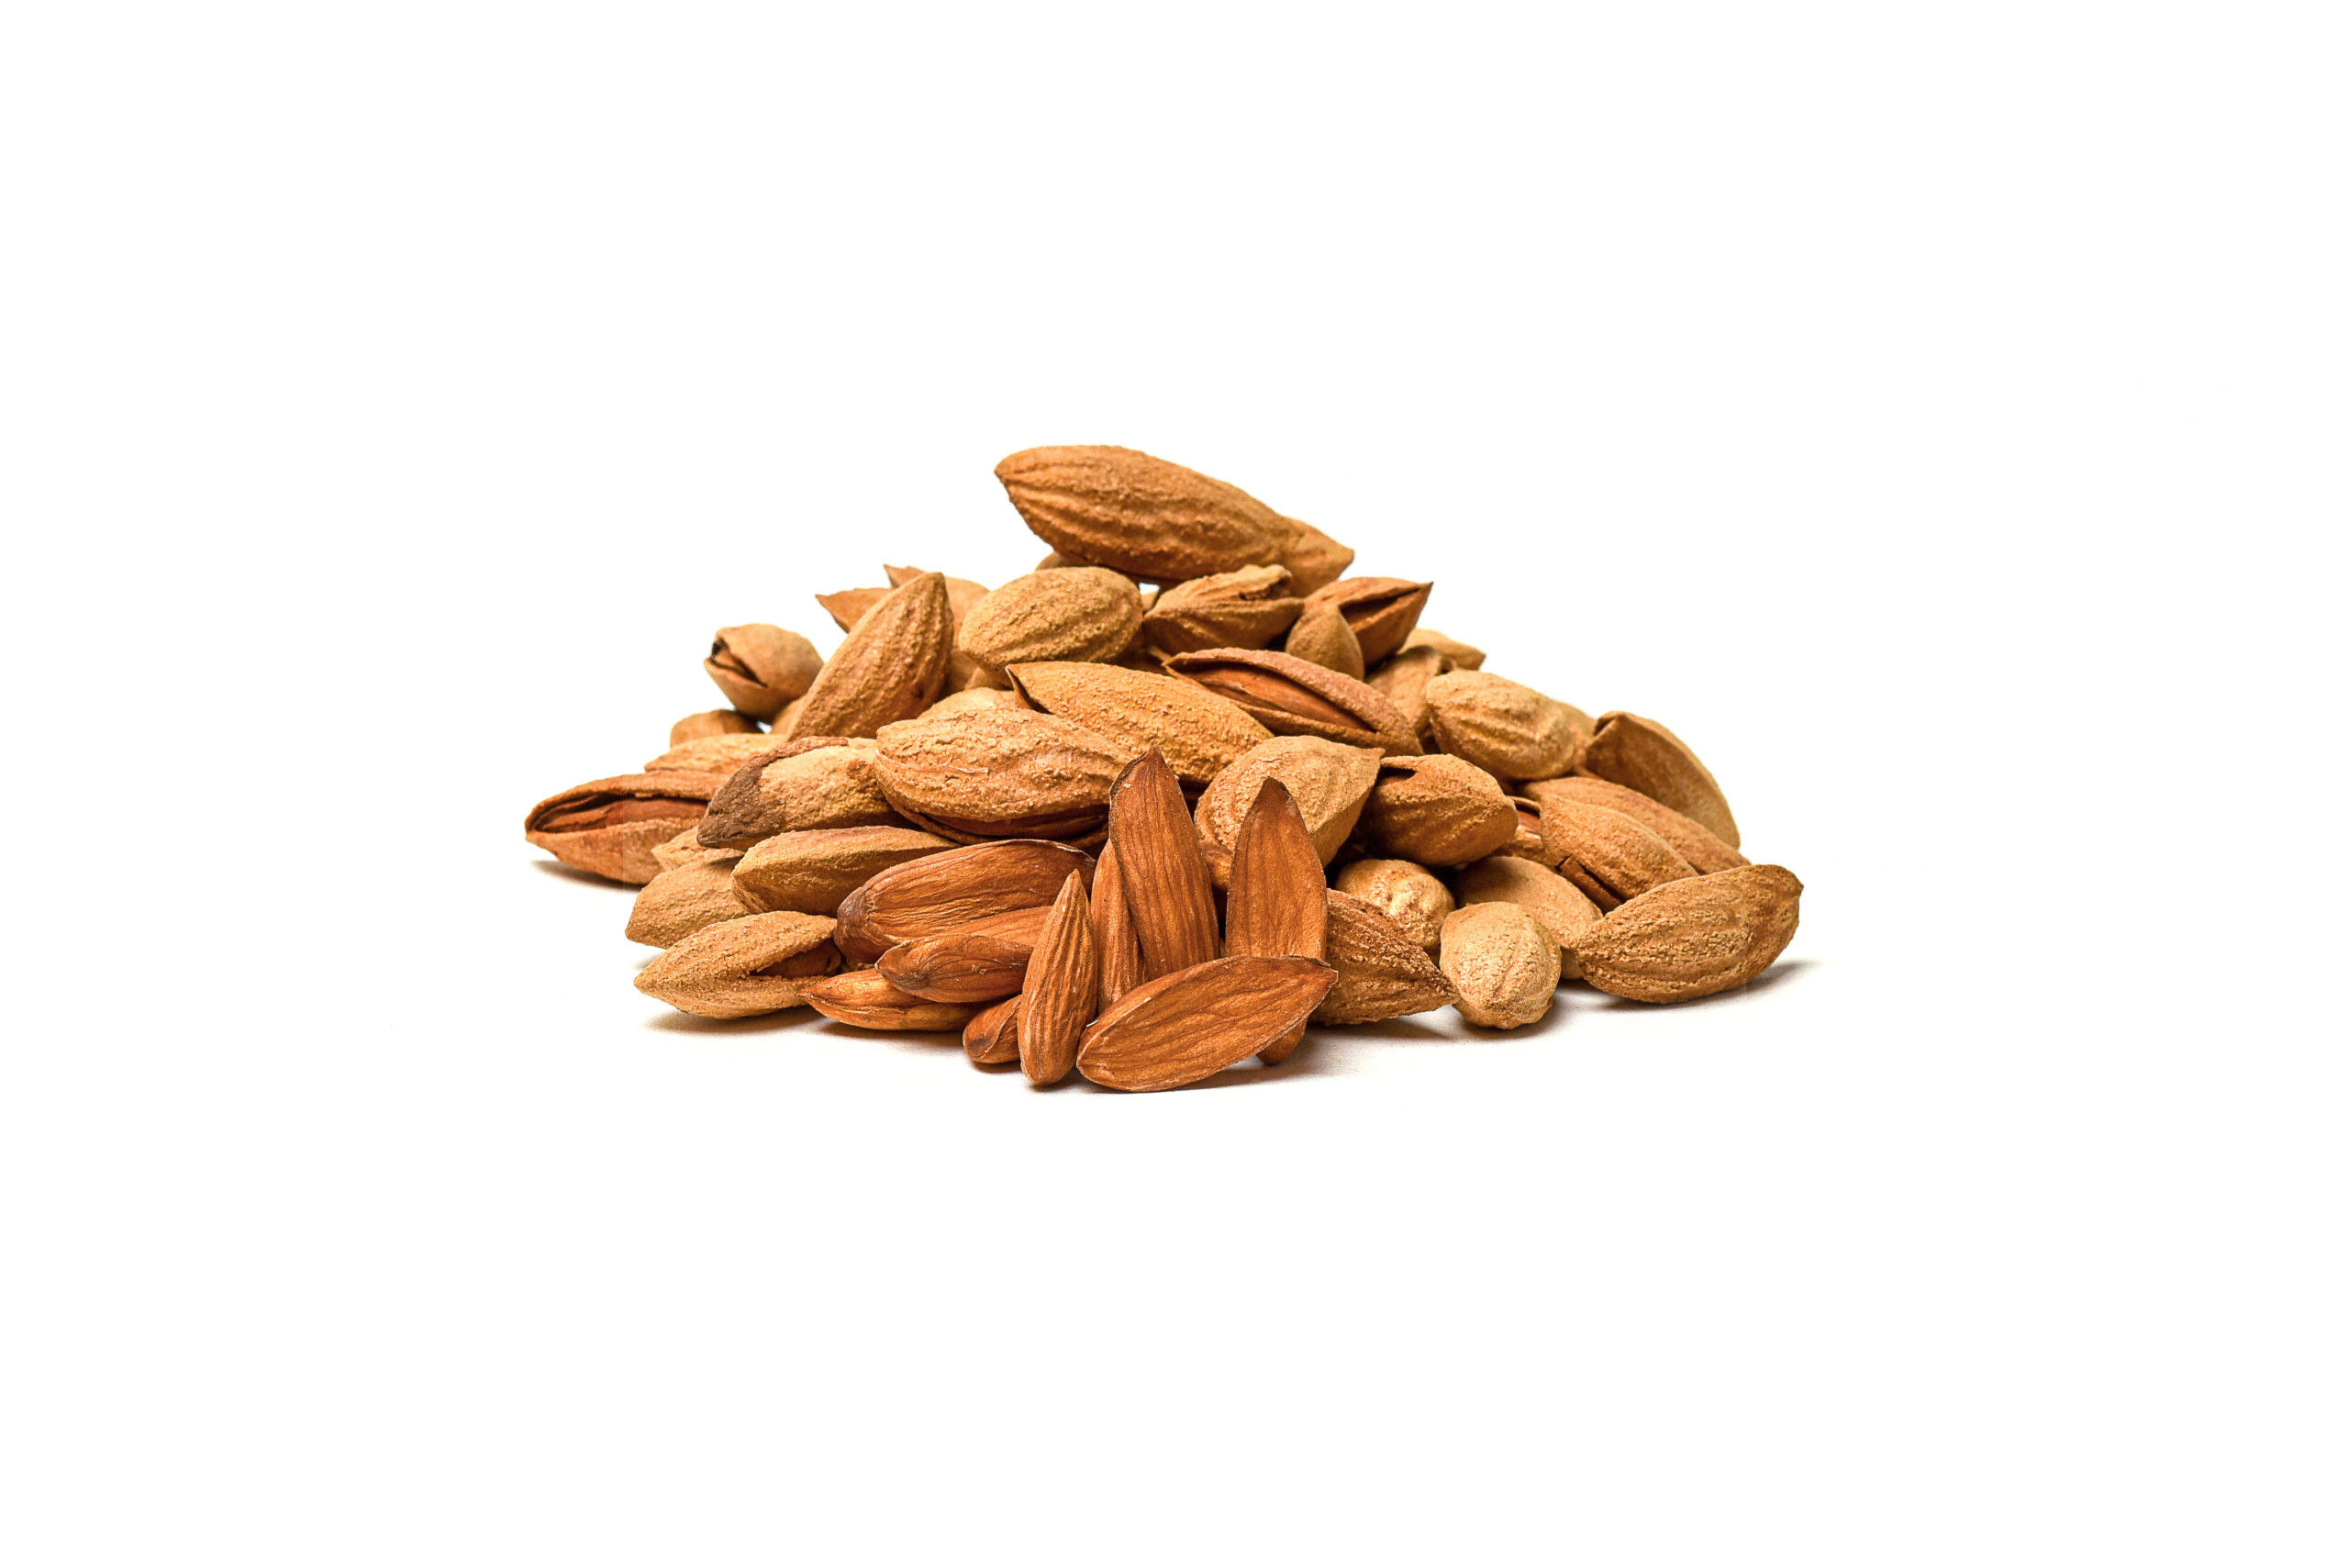 Roasted almond, shelled